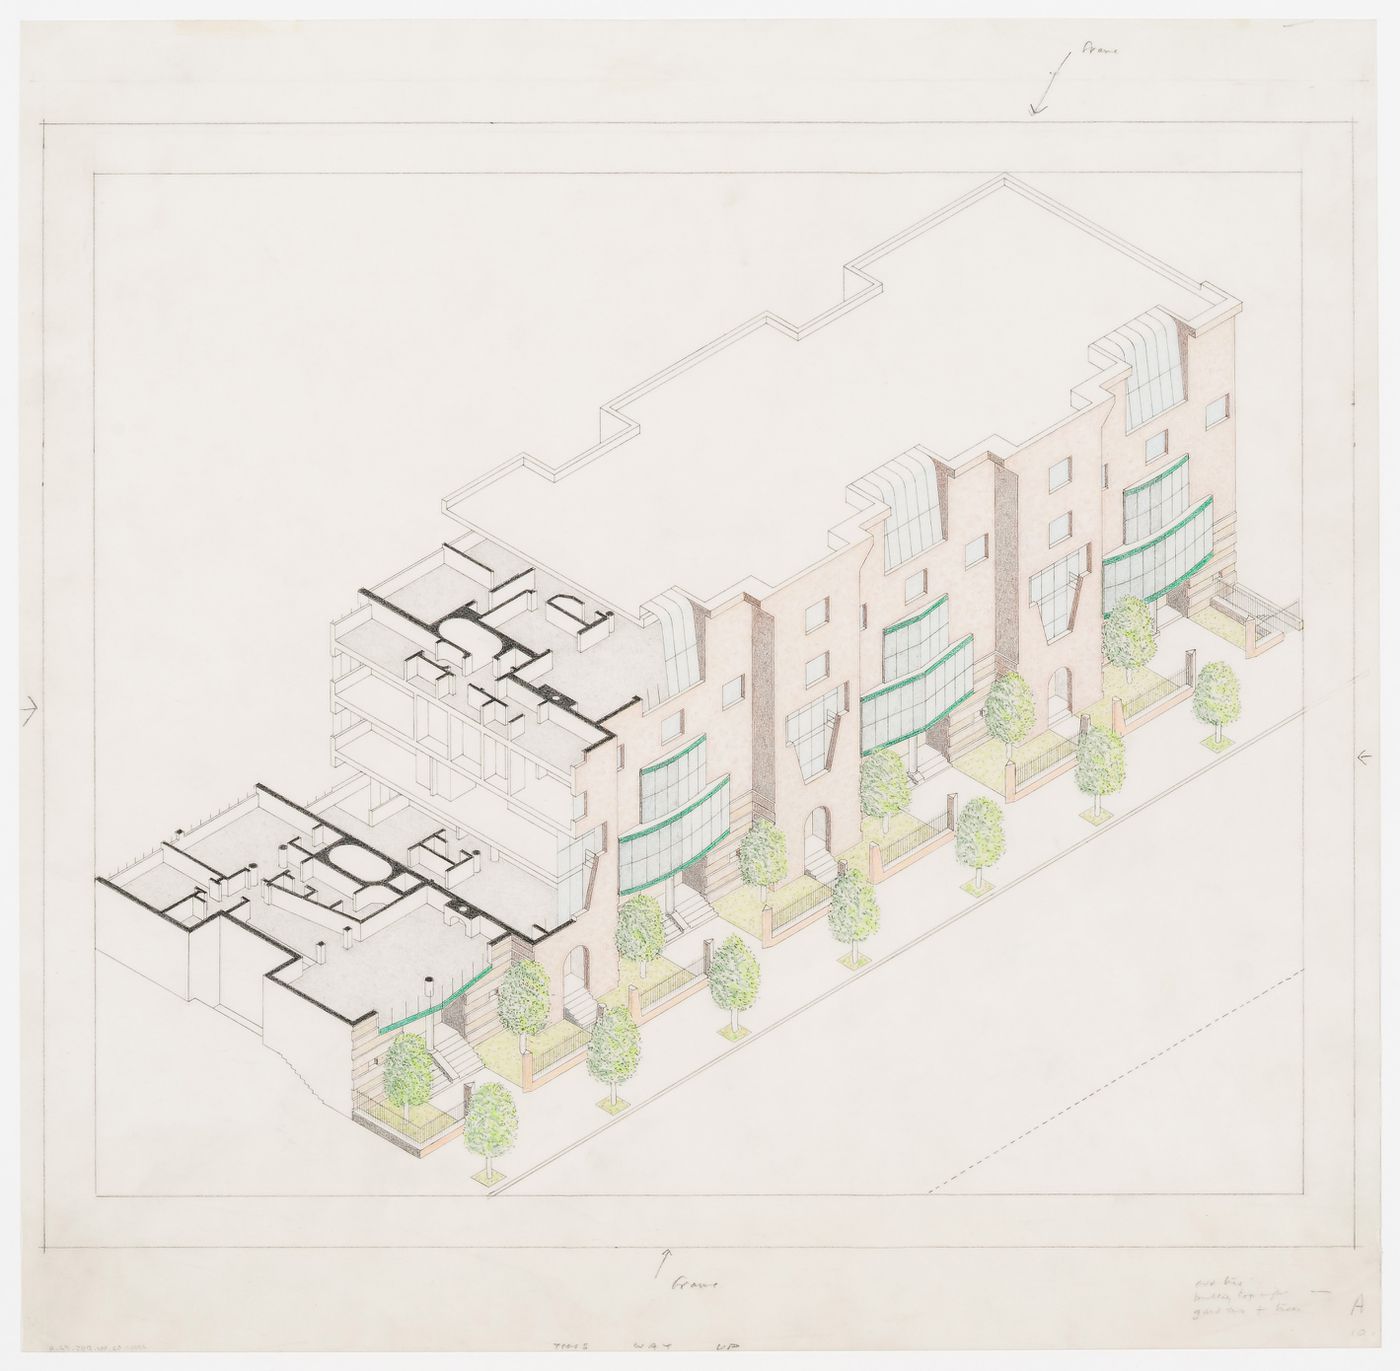 Eleven Townhouses Competition, New York, New York: cut-away axonometric